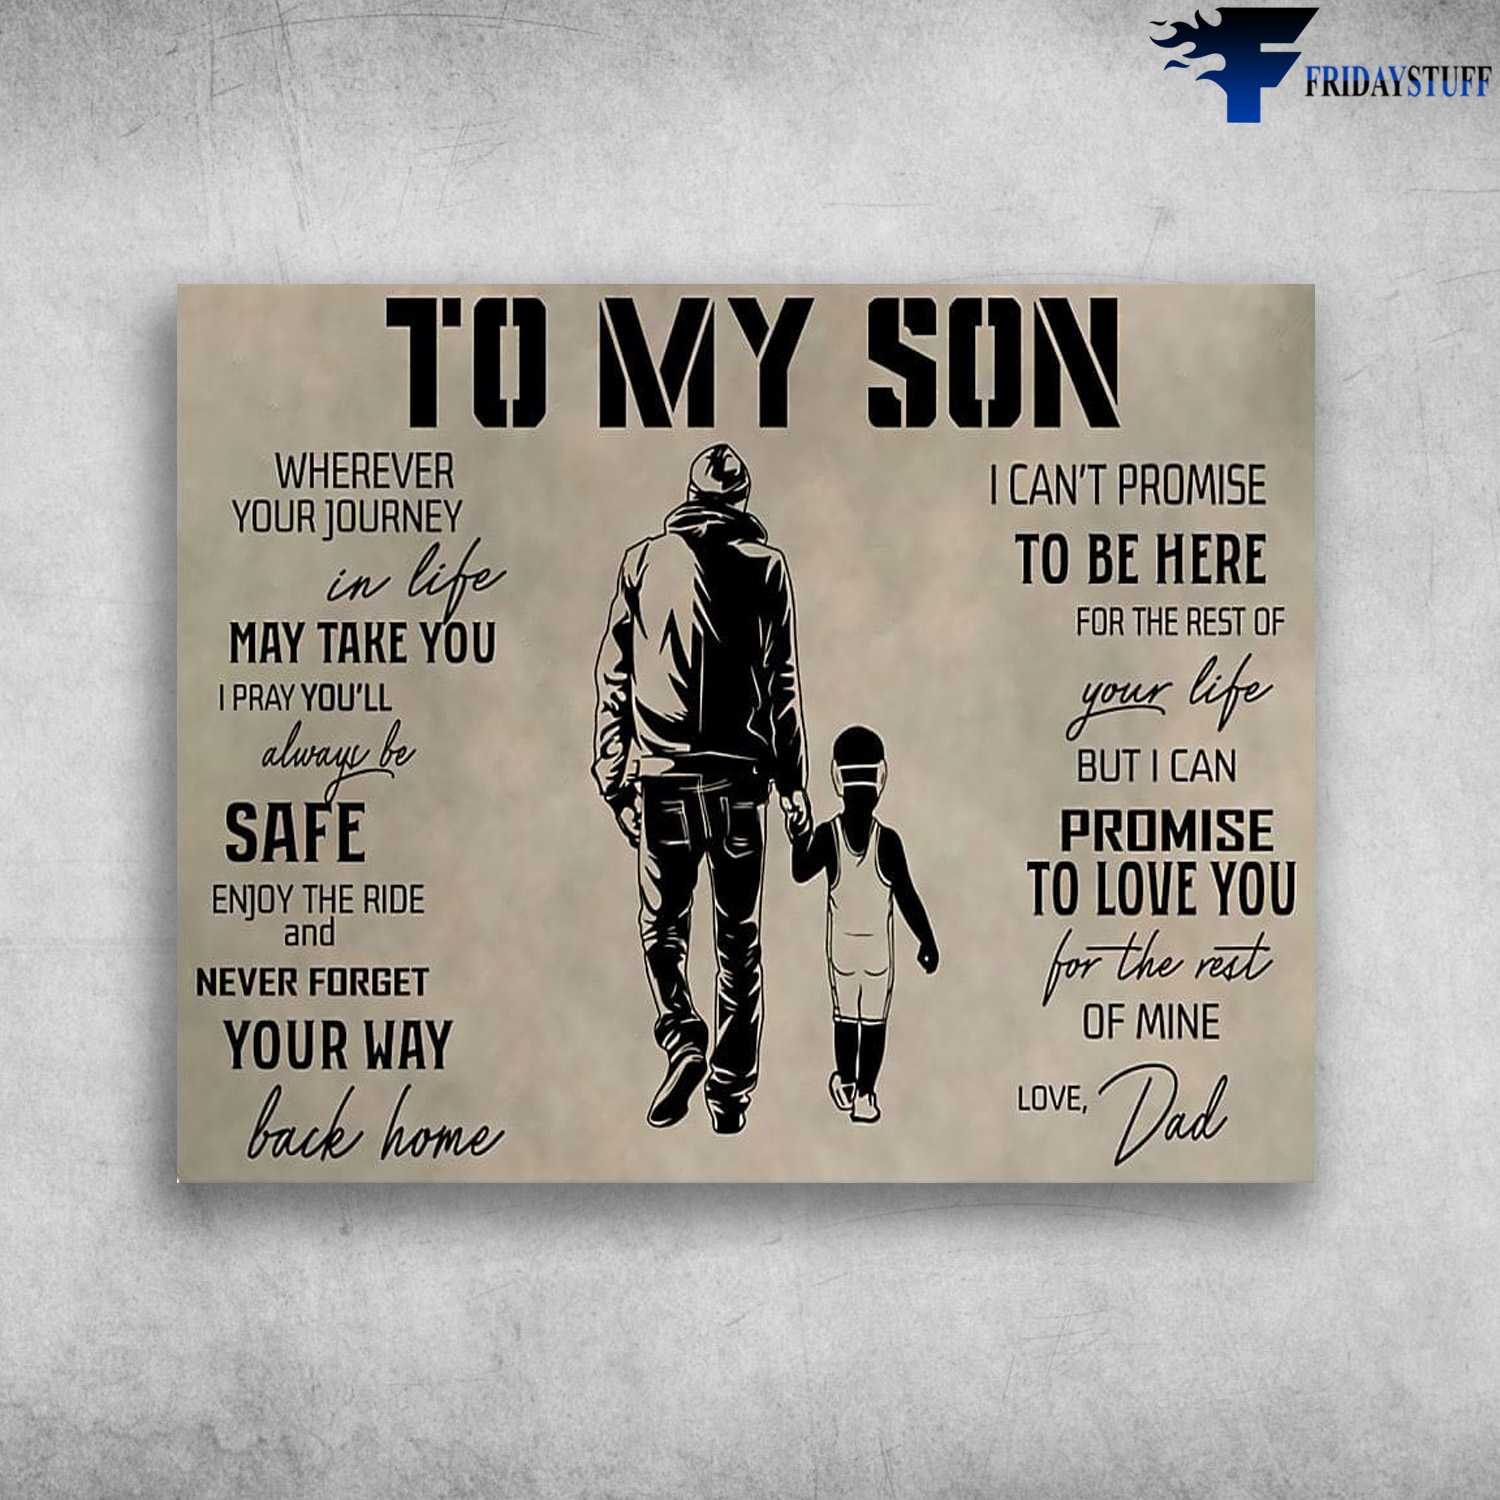 Dad And Son, Gift From Dad, Wherever Your Journey In Life May Take You, I Pray You'll Always Be Safe, Enjoy The Ride, And Never Forget Your Way Back Home, I Can't Promise To Be Here